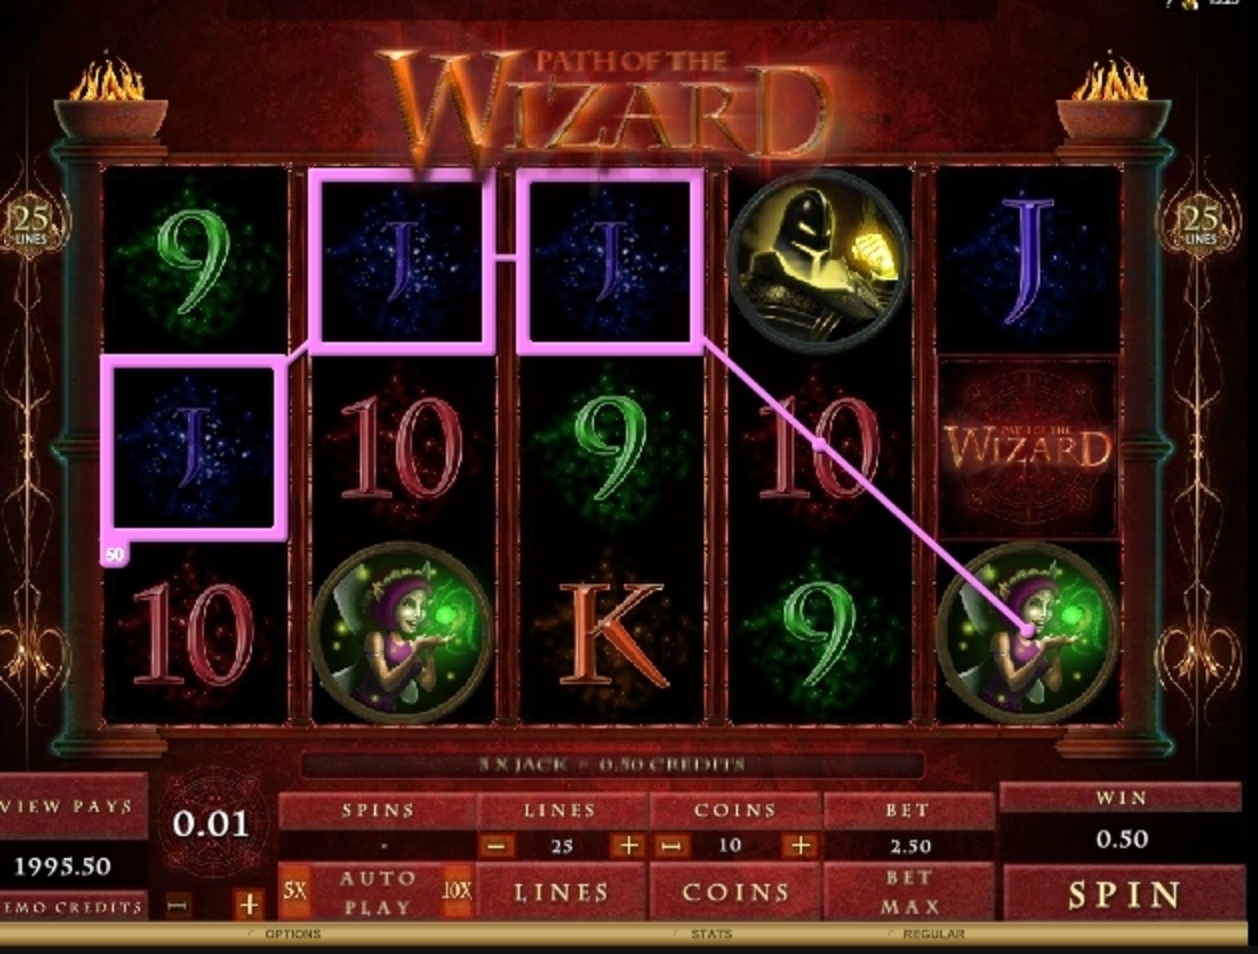 Win Money in Path of the Wizard Free Slot Game by Microgaming